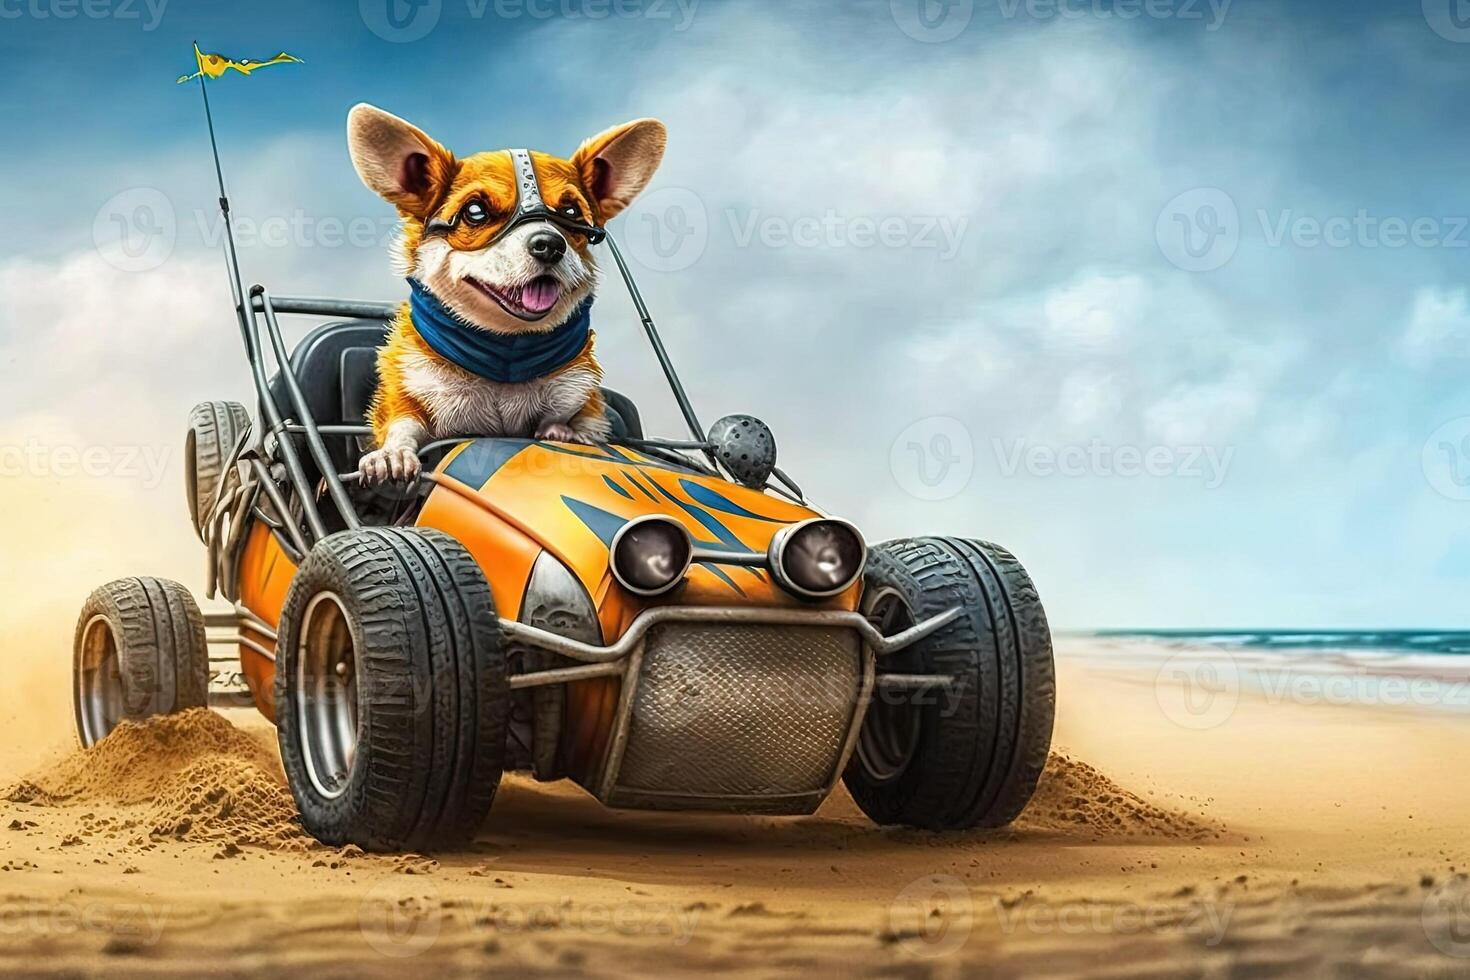 Crazy dog driving dune buggy on the sandy beach illustration photo